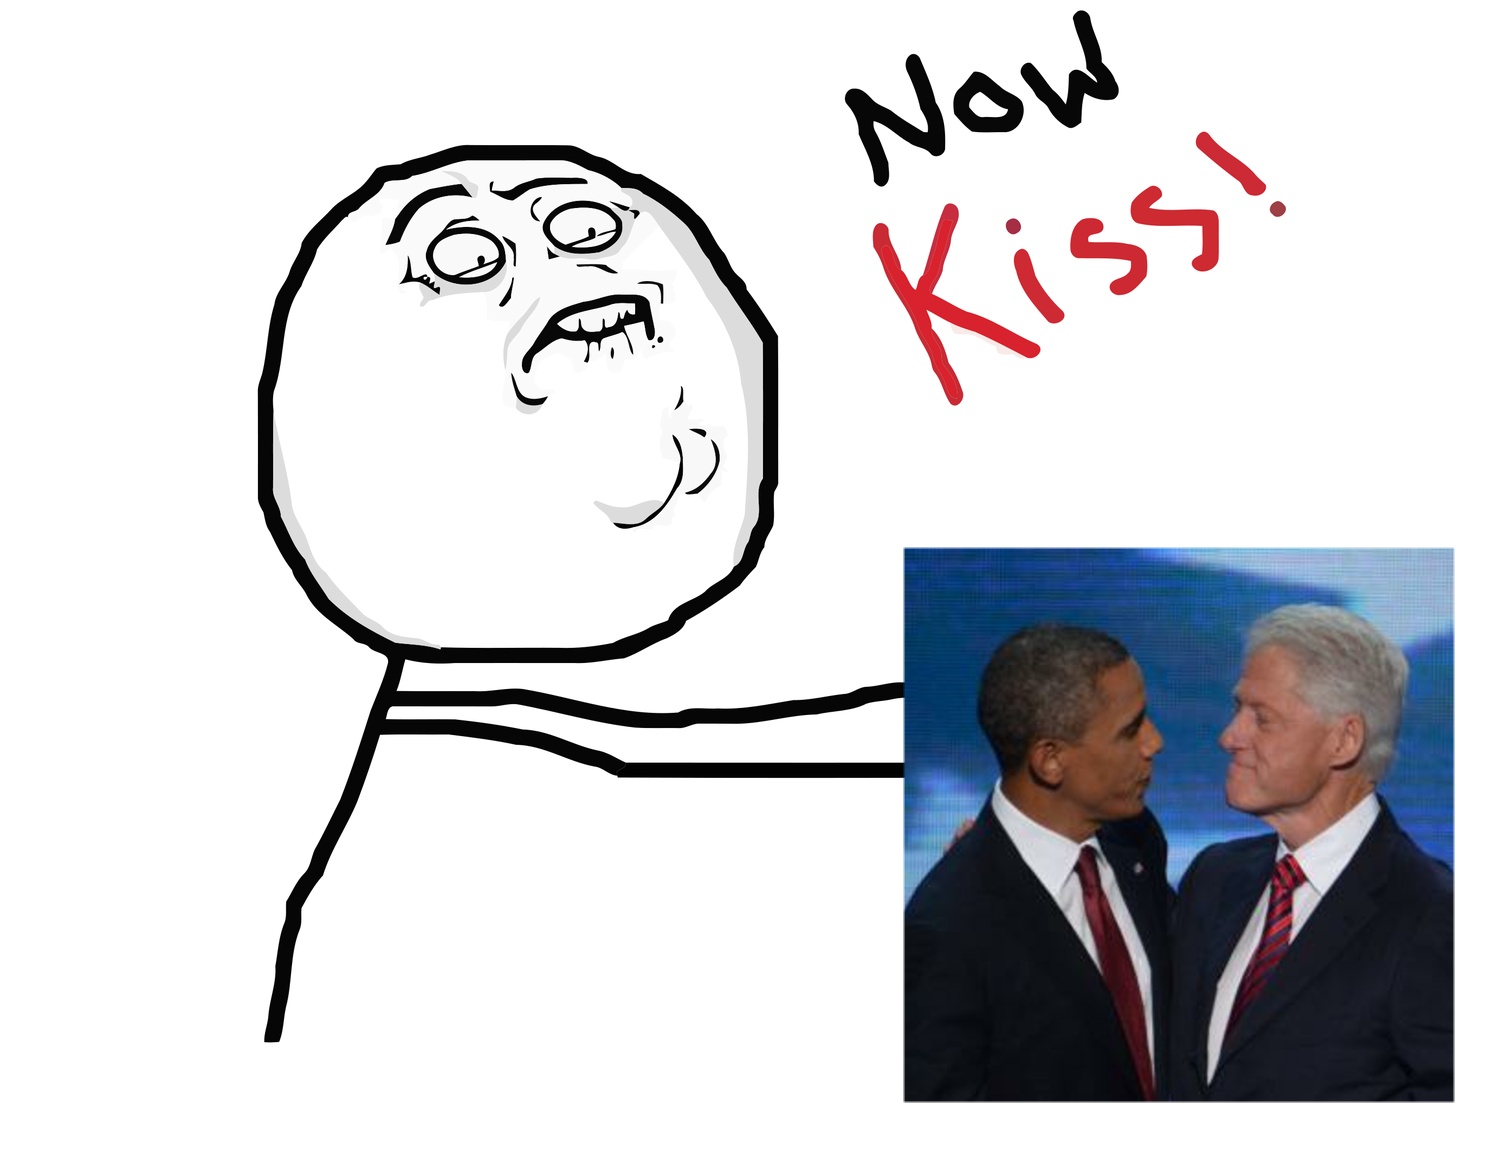 Obama and Clinton "Now Kiss" meme.  Maybe THAT has something to do with the refusal to kiss the Mrs. under the kiss cam?